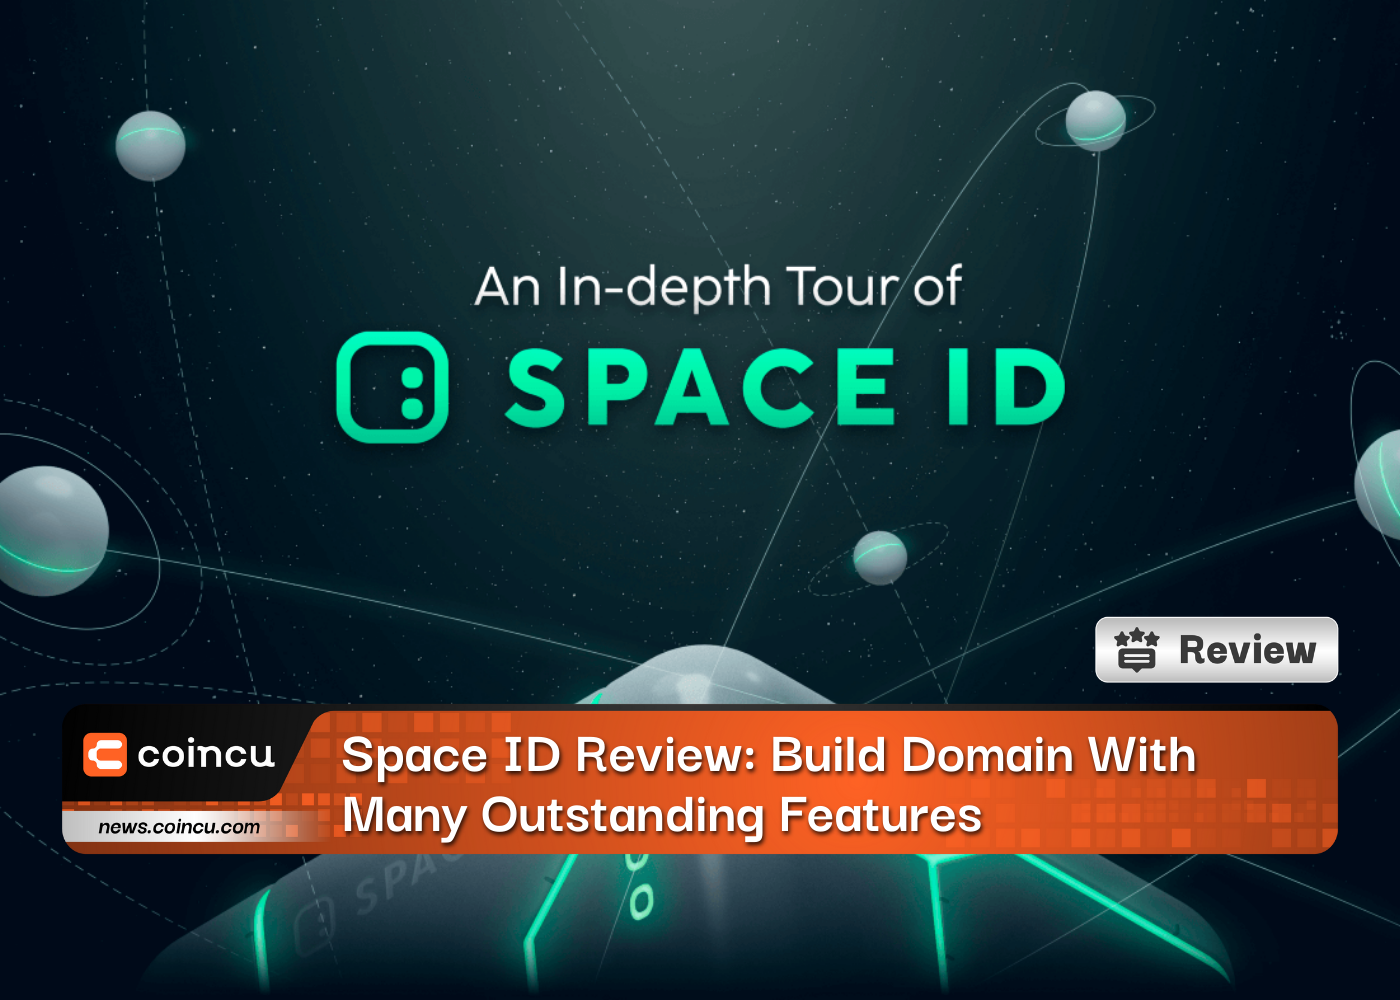 Space ID Review: Build Domain With Many Outstanding Features